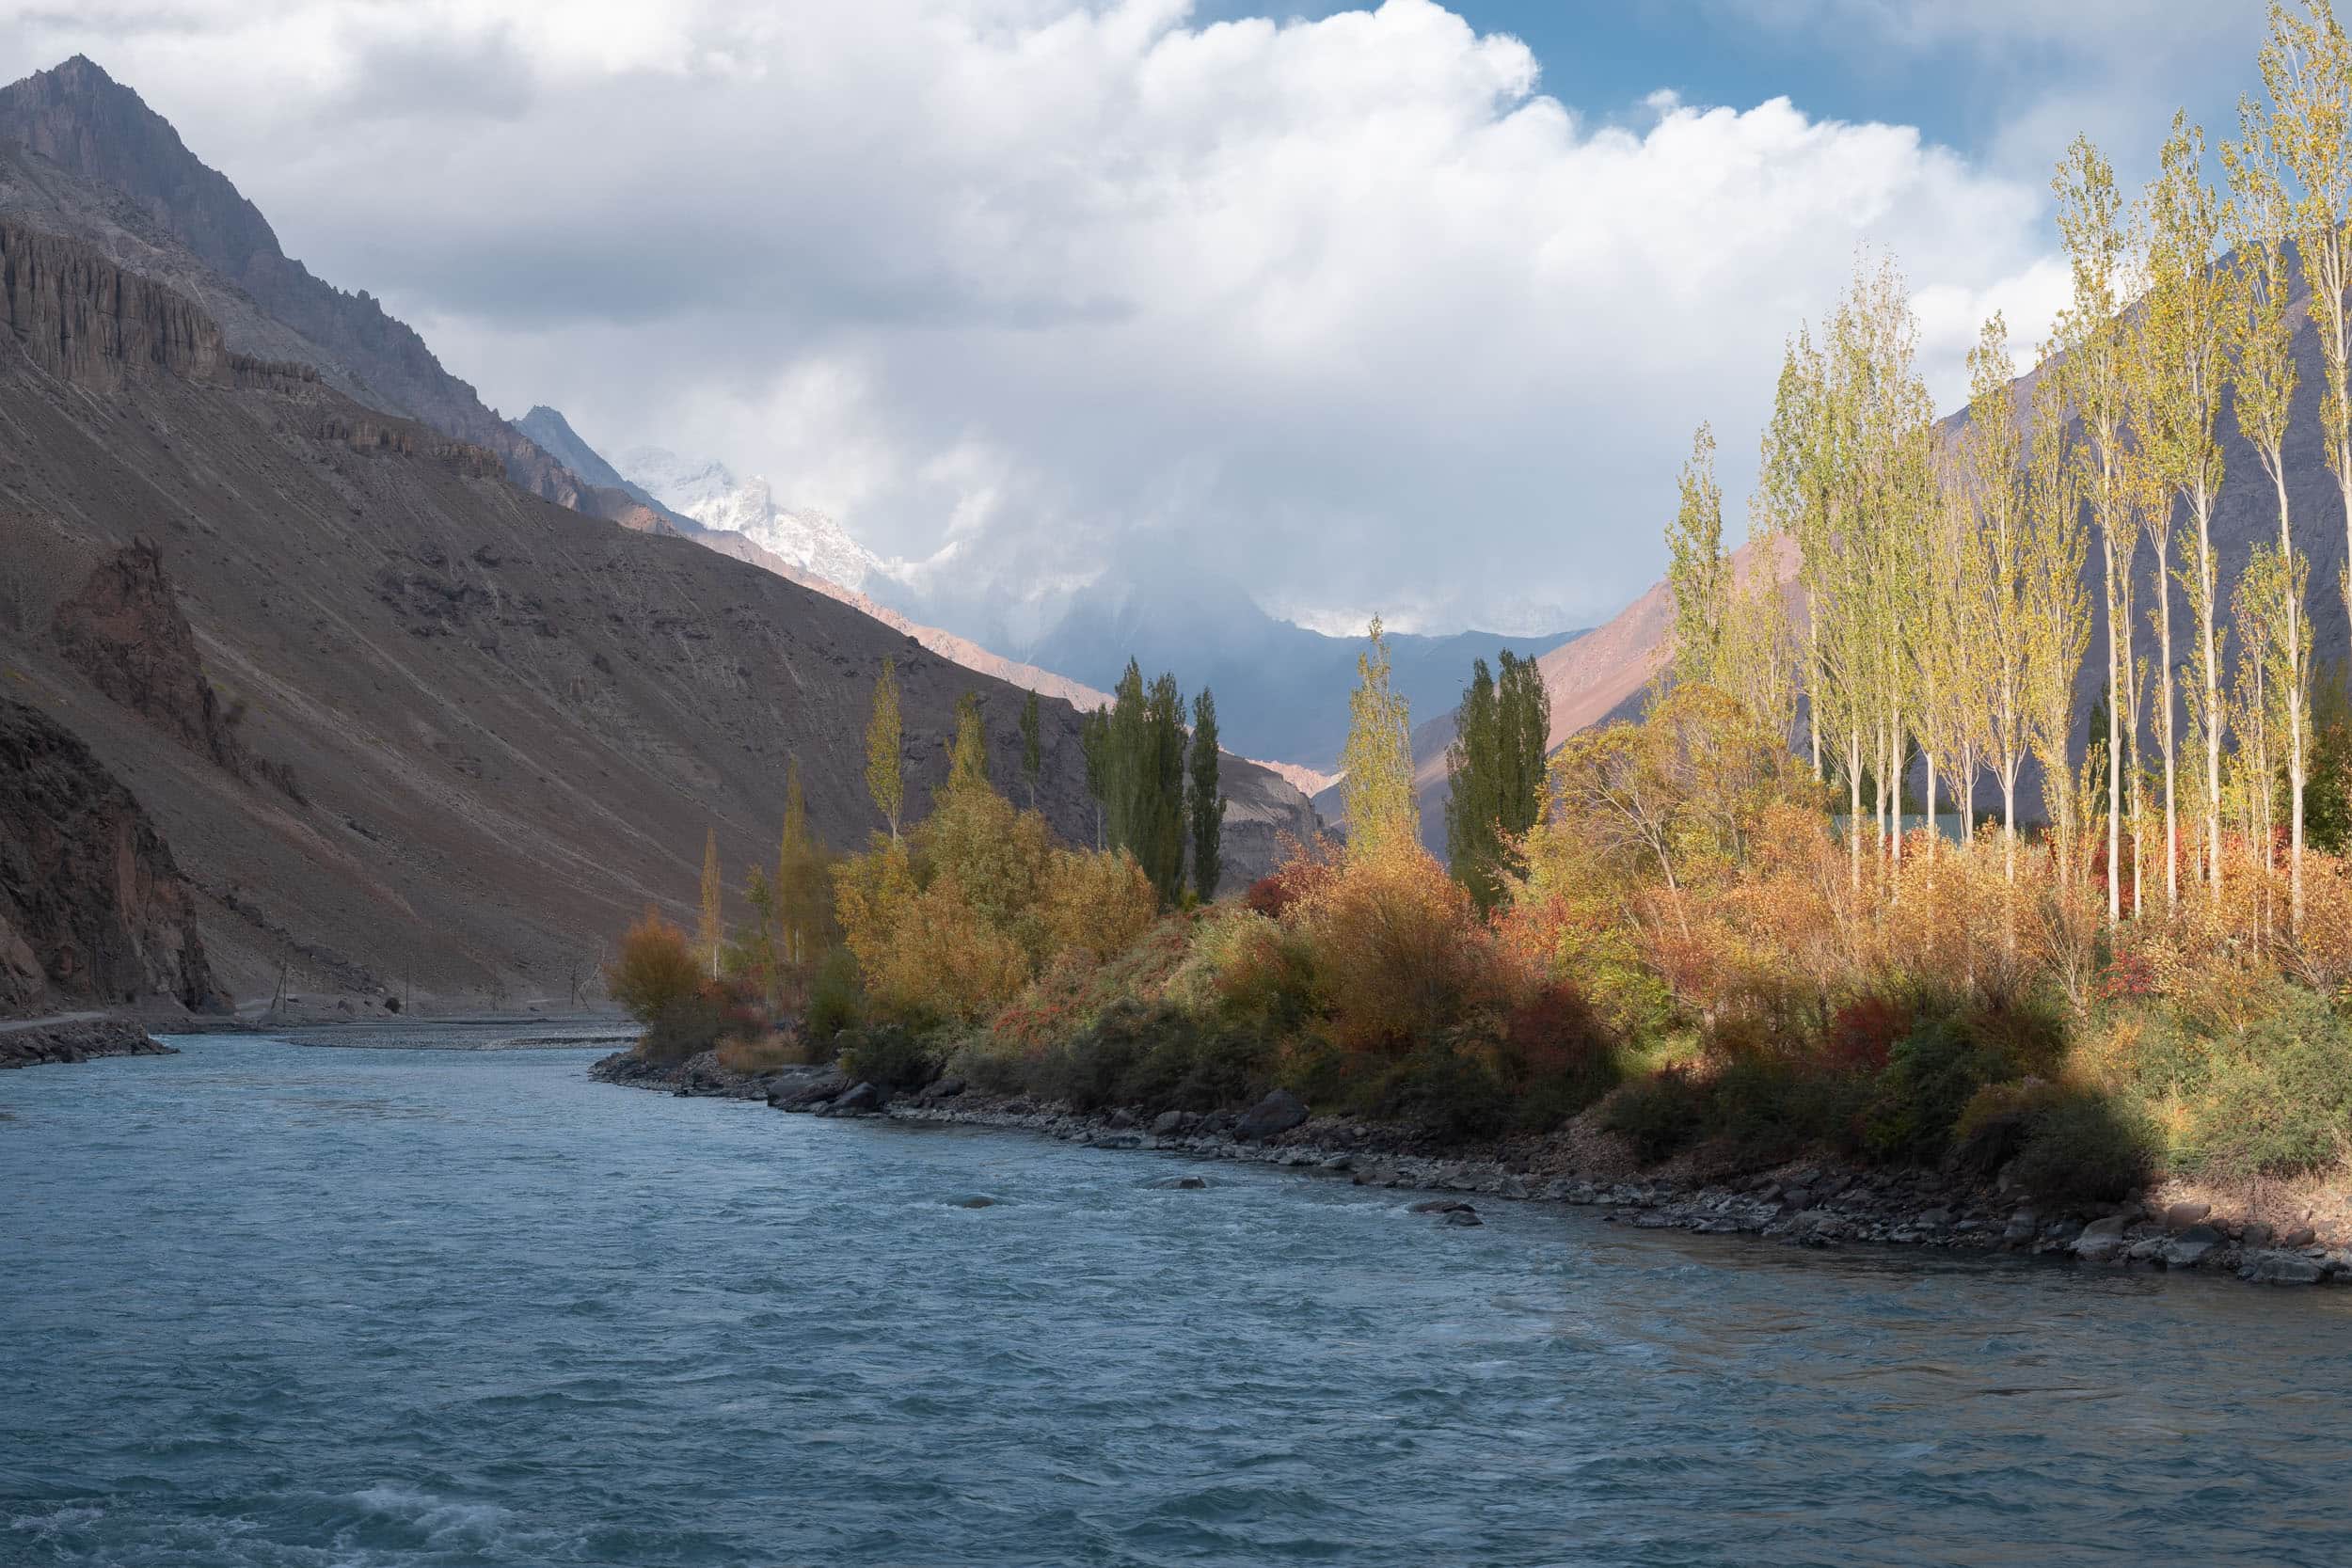 Bartang valley in autumn